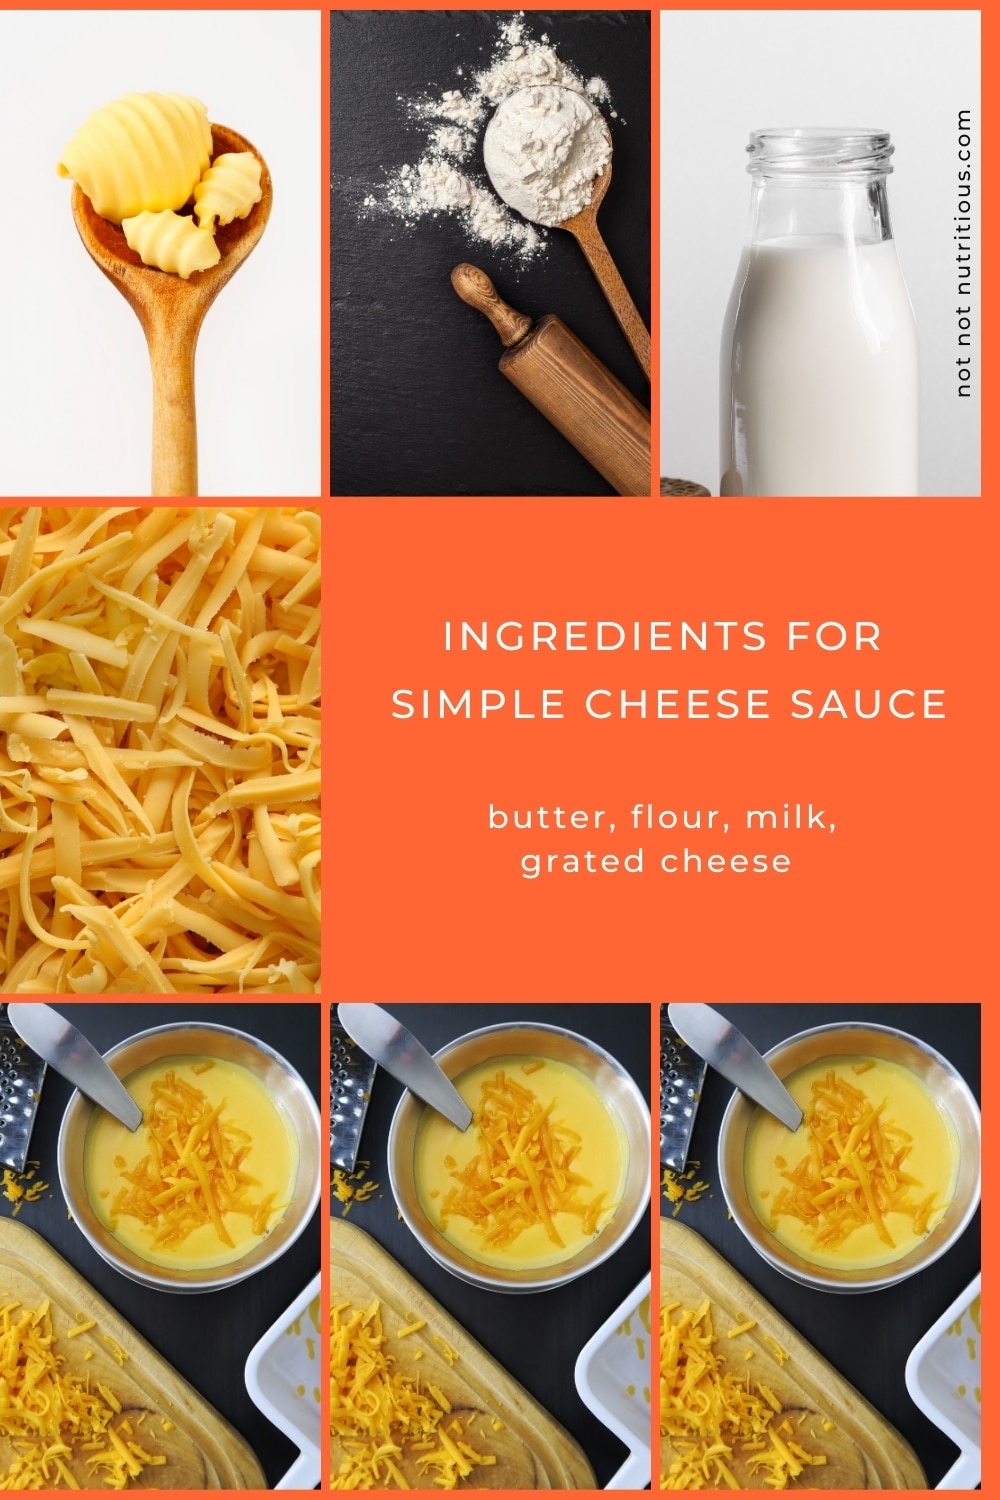 Ingredients: Simple Cheese Sauce. Butter, flour, milk, and grated cheese